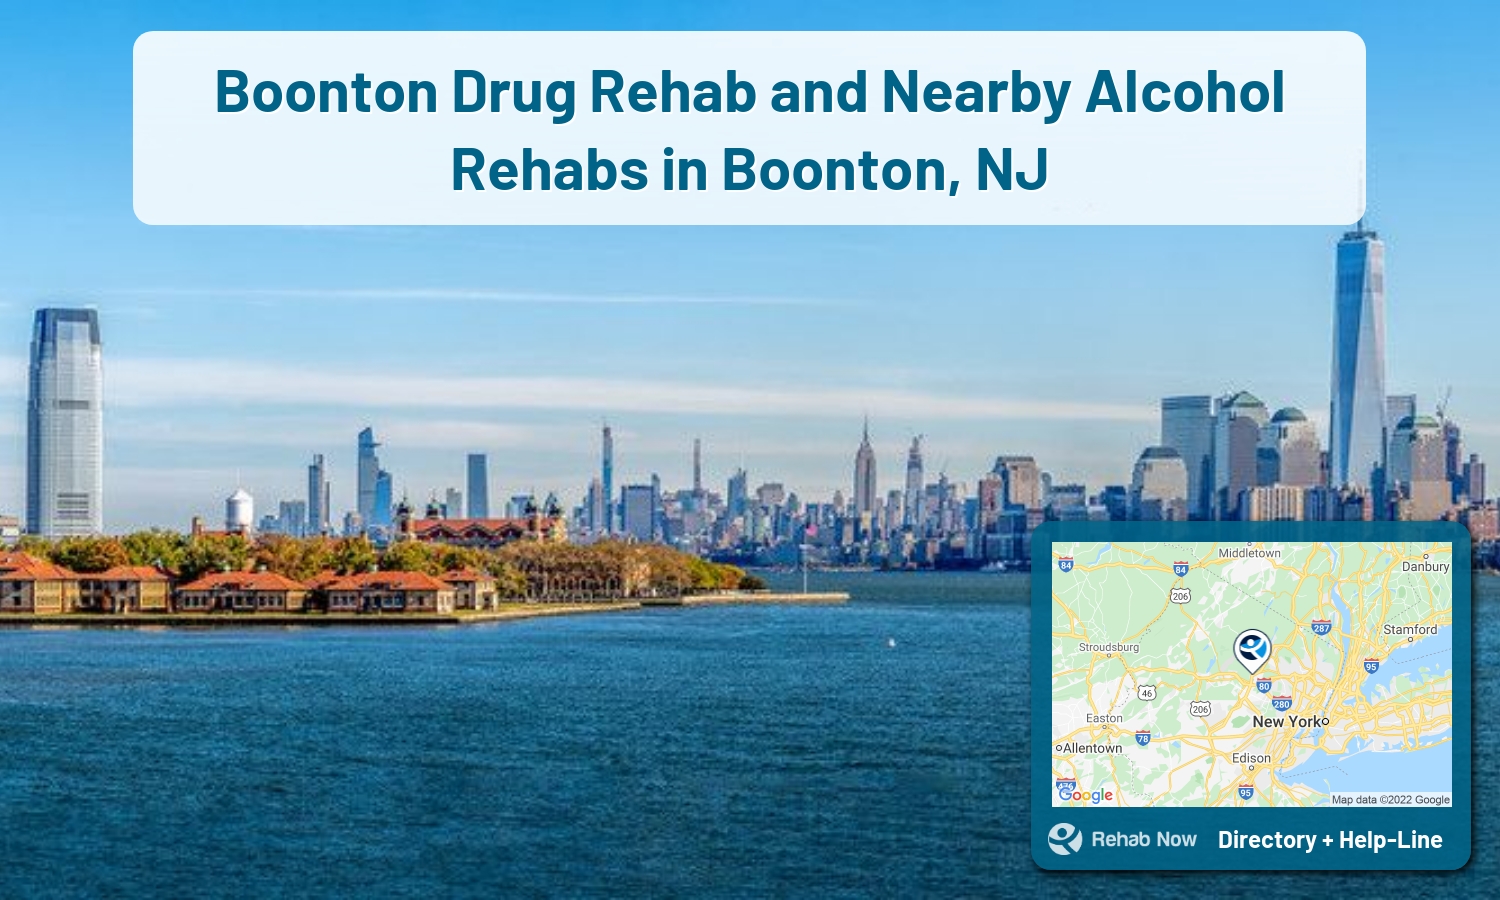 Find drug rehab and alcohol treatment services in Boonton. Our experts help you find a center in Boonton, New Jersey